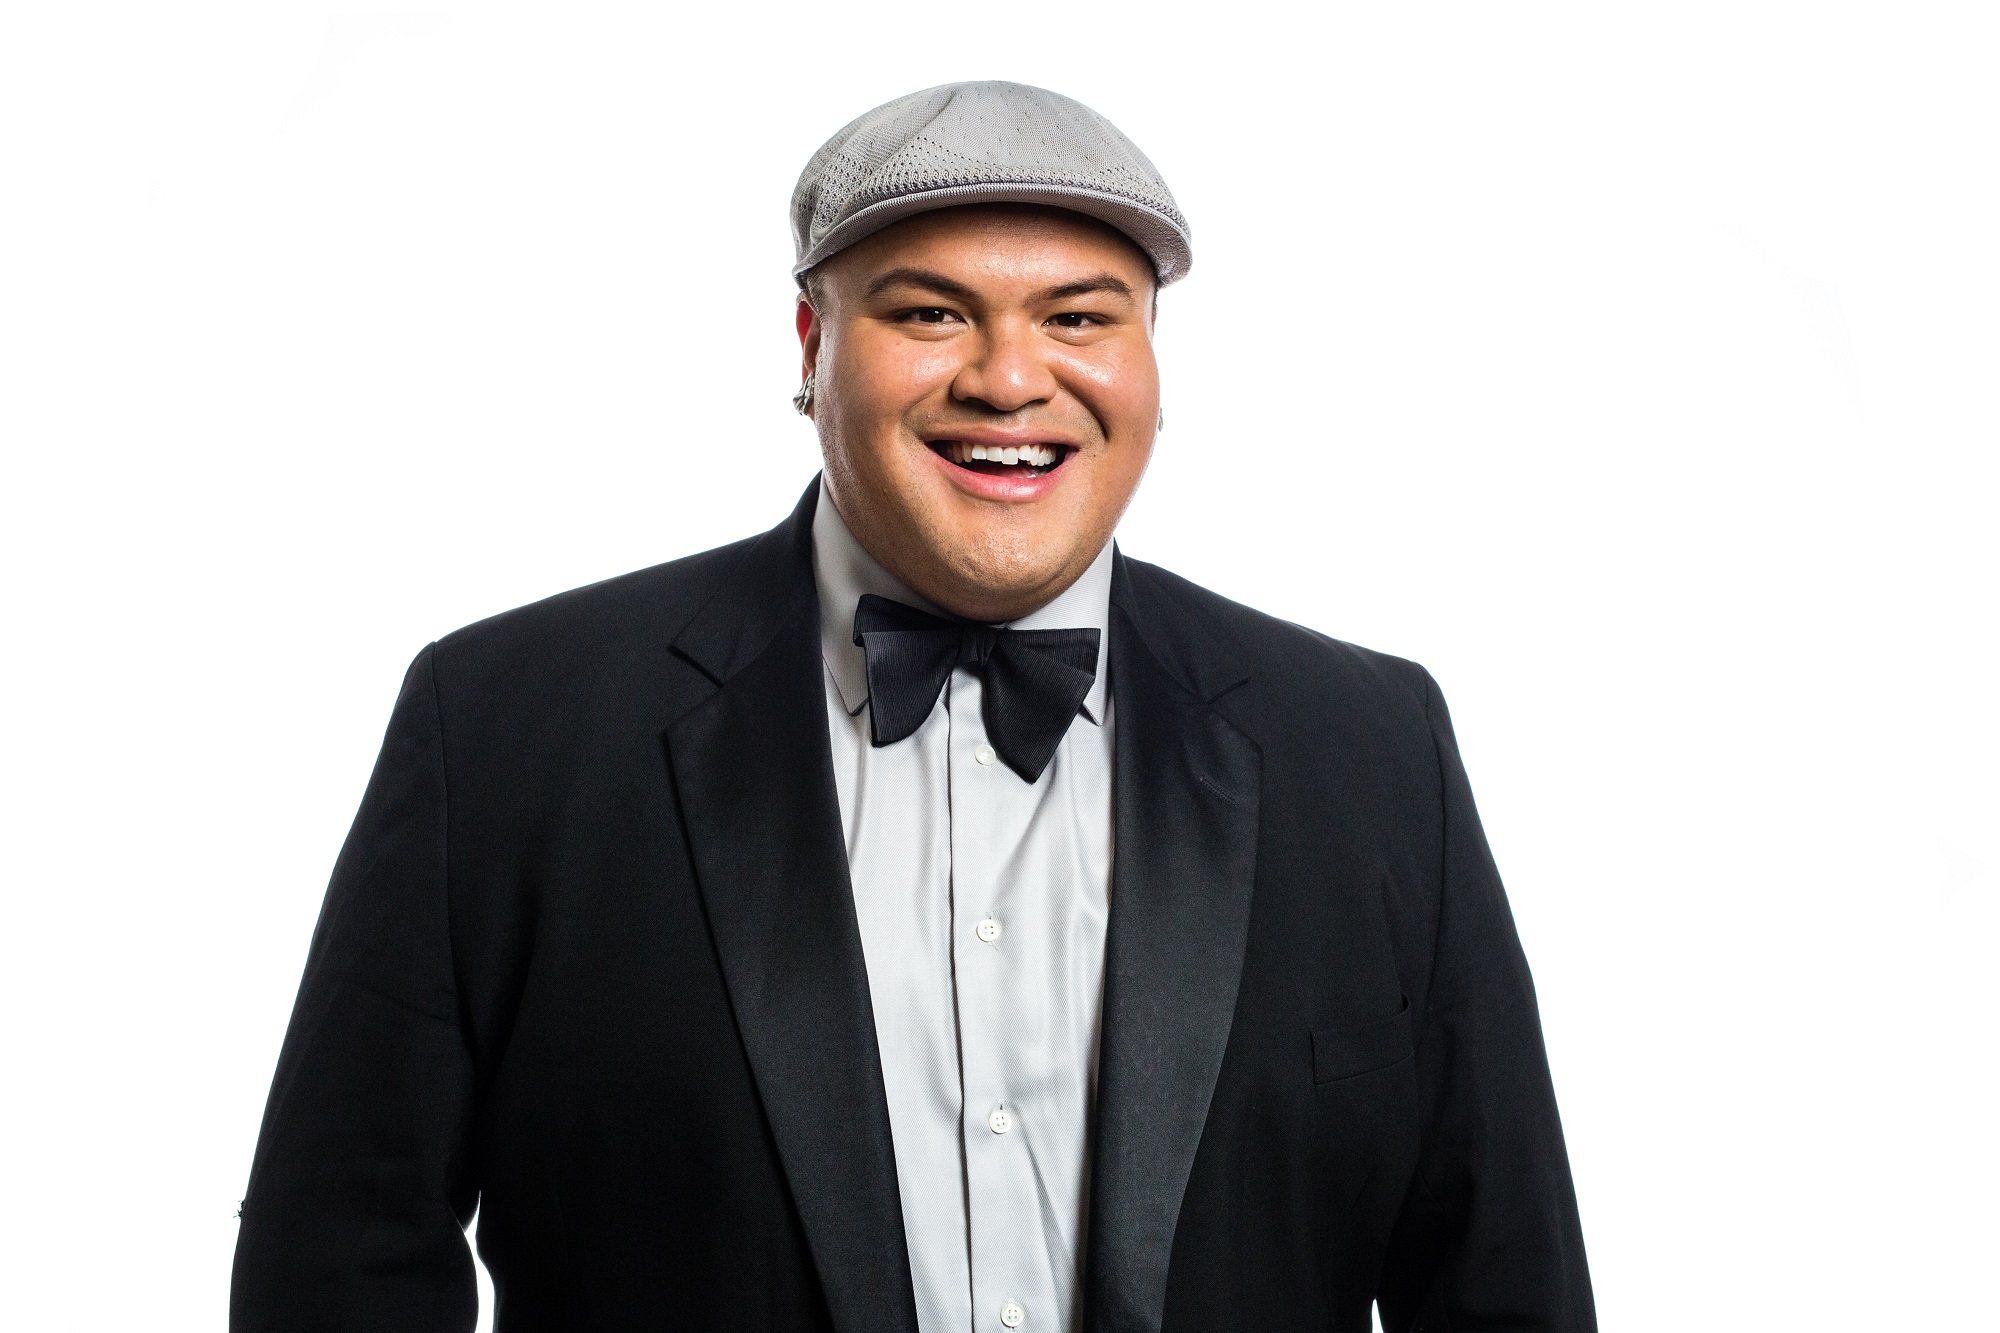 Kalani wearing a suit with bowtie and a cap